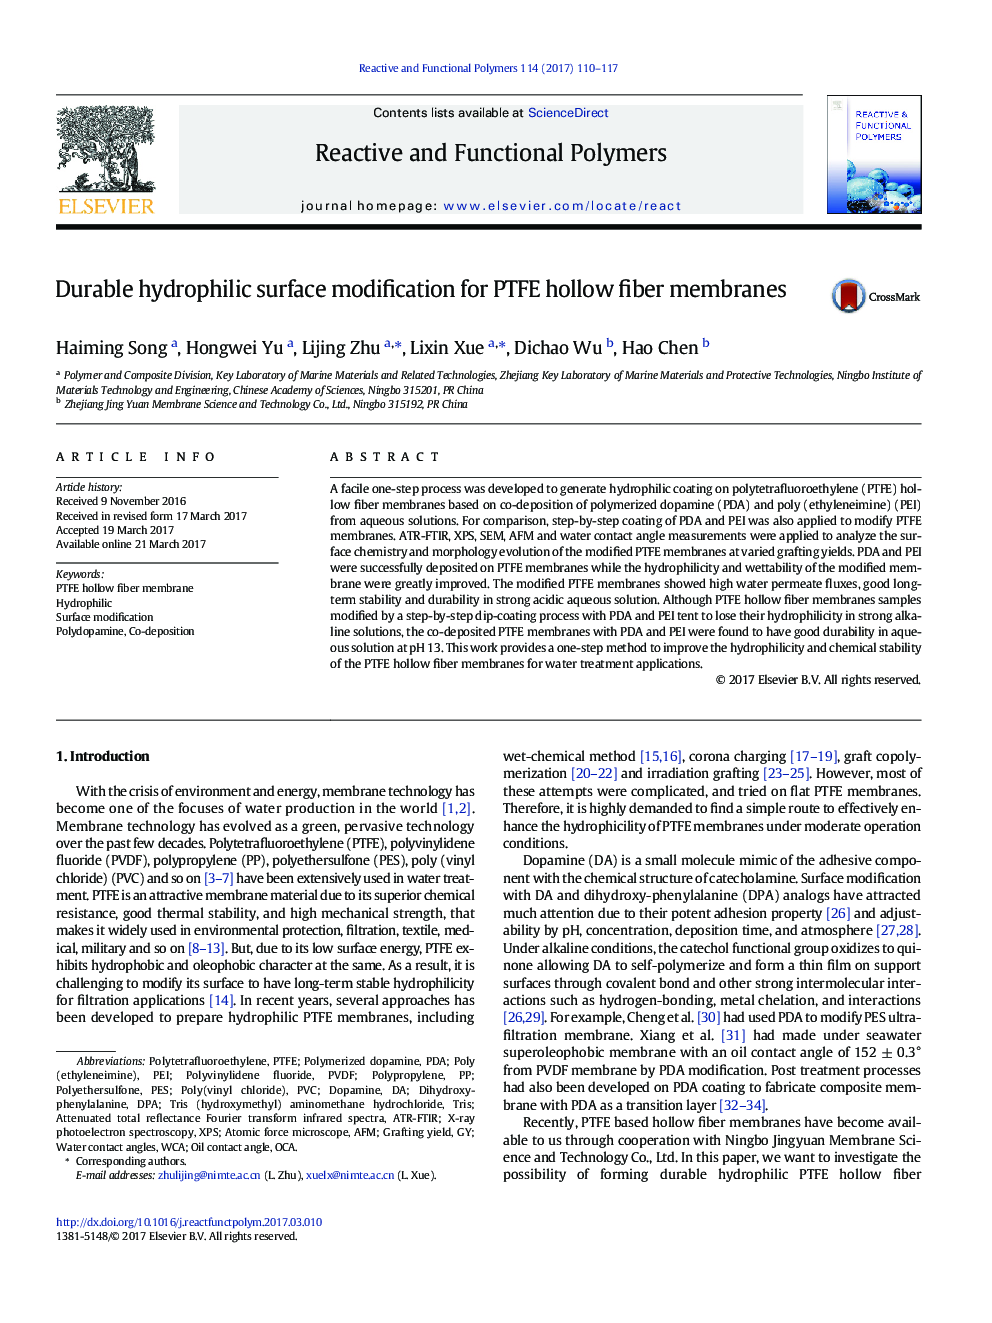 Durable hydrophilic surface modification for PTFE hollow fiber membranes